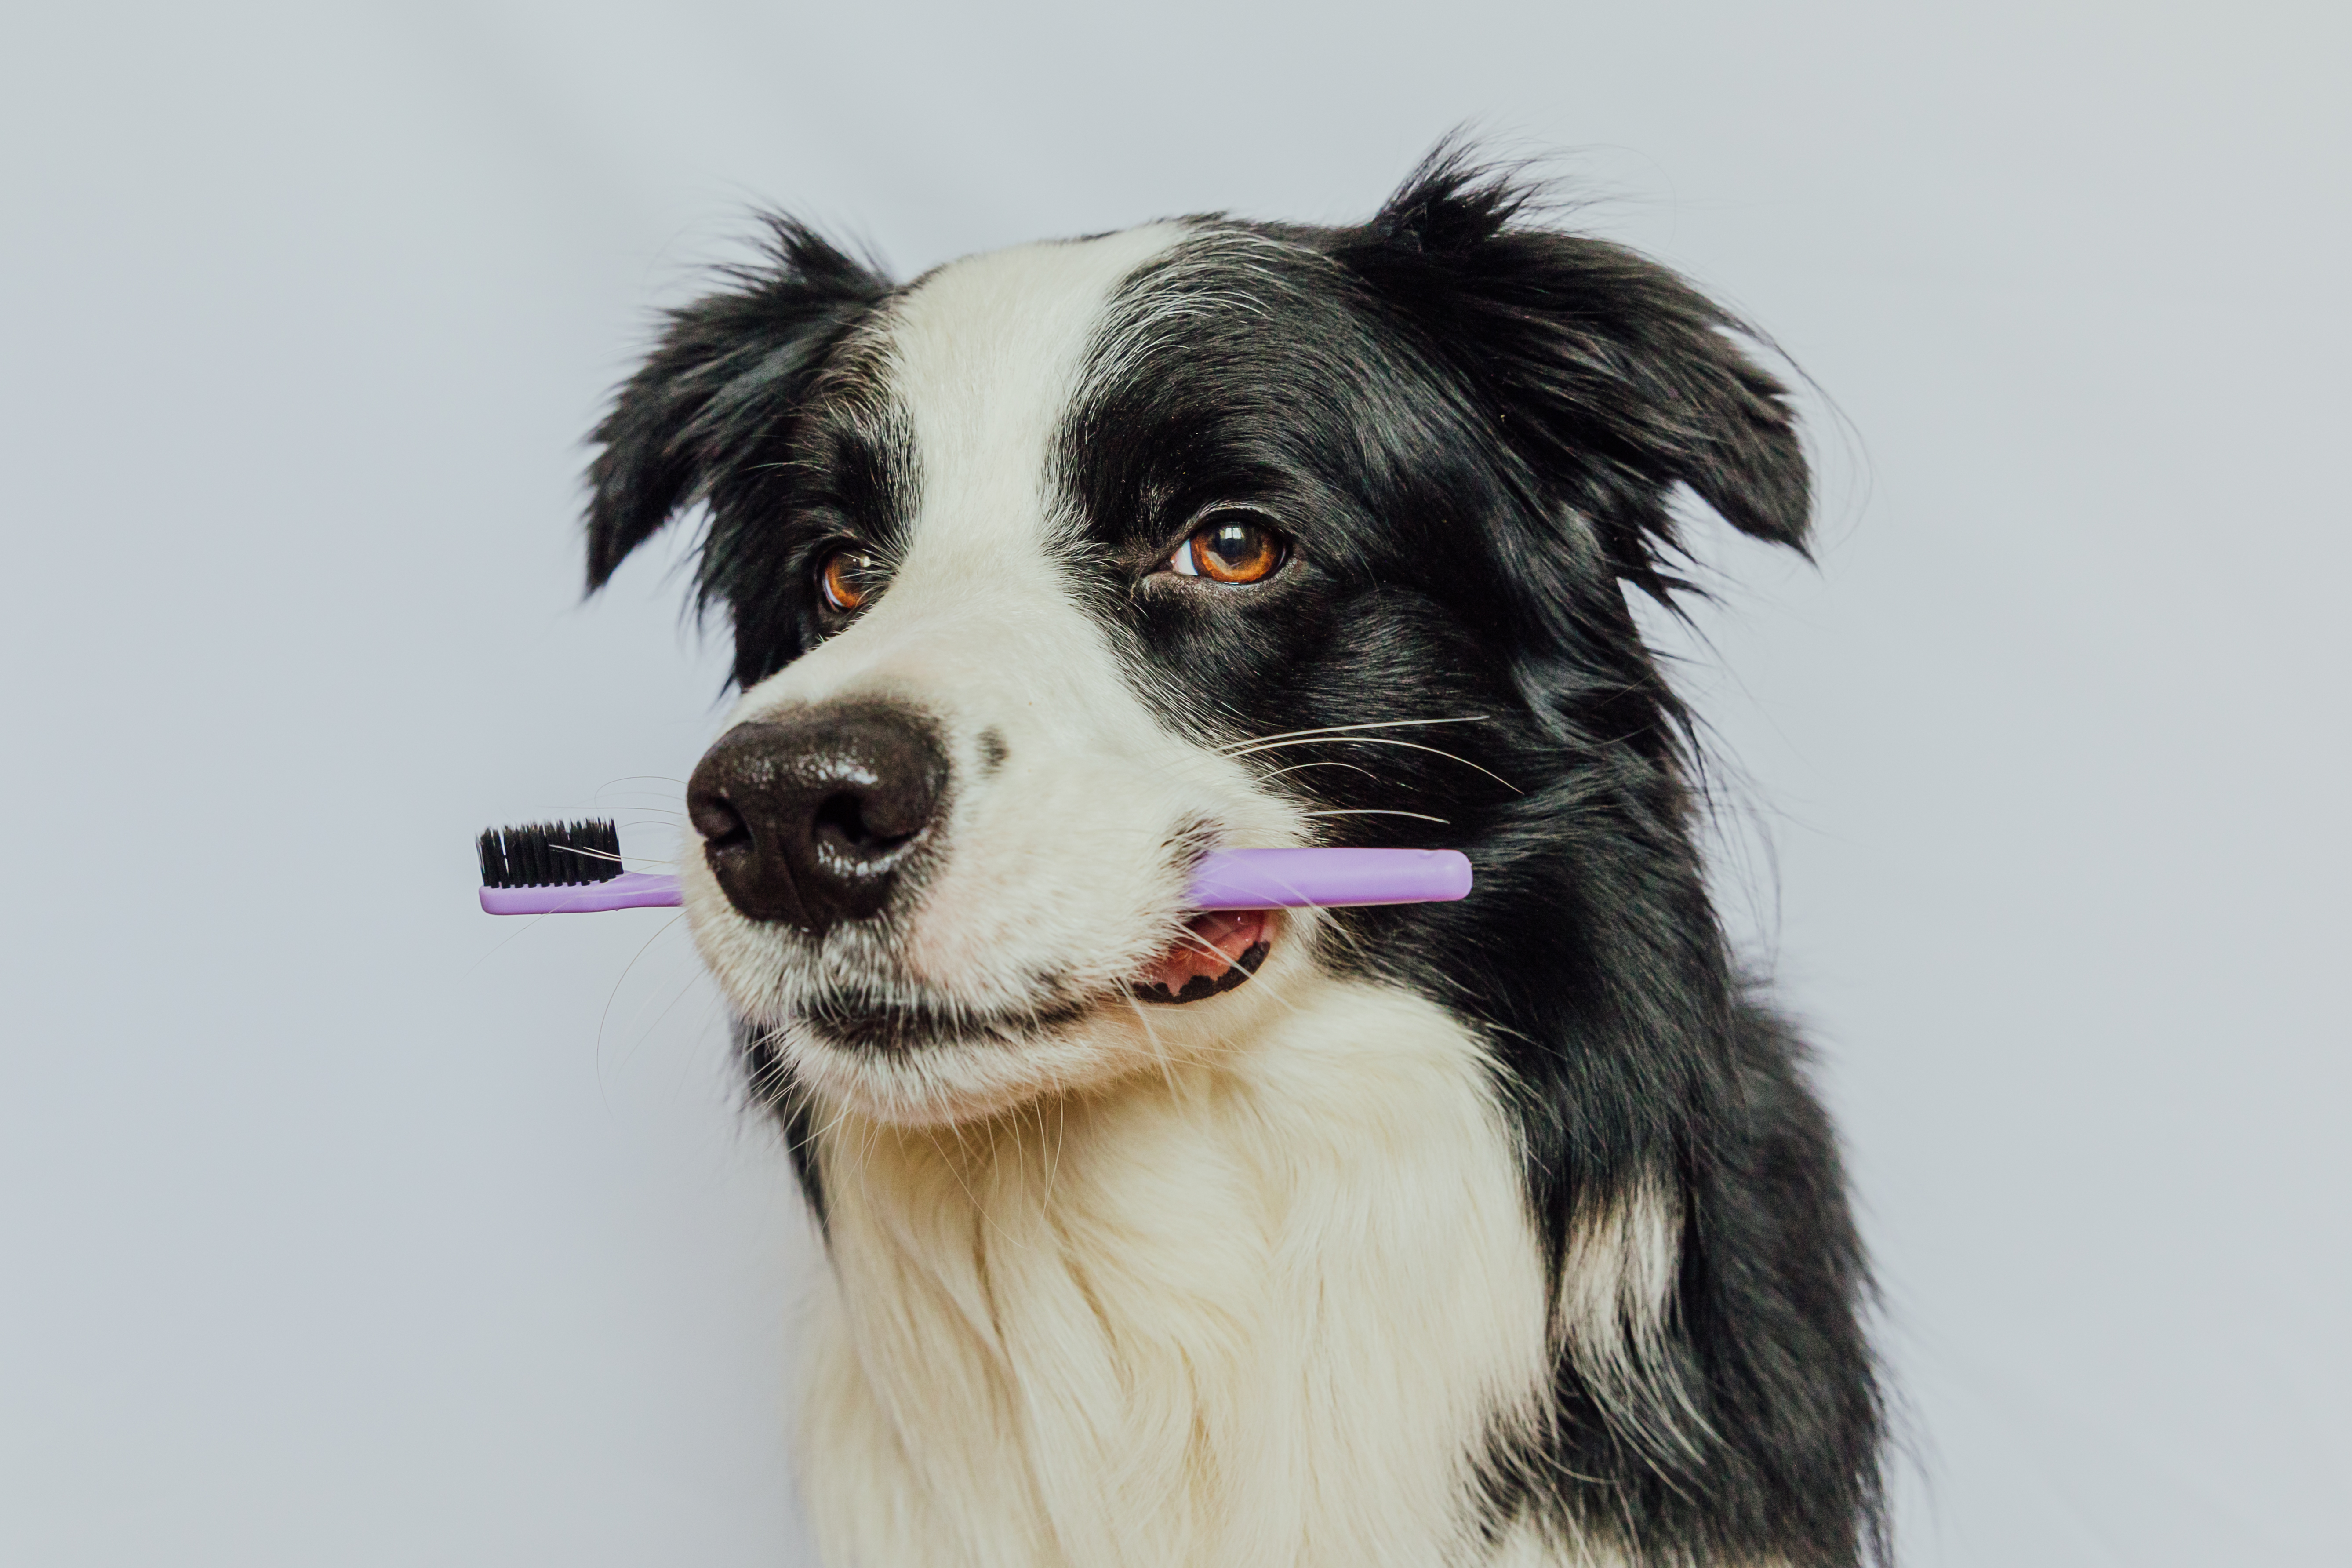 cute-smart-funny-puppy-dog-border-collie-holding-toothbrush-mouth-isolated-white-background-oral-hygiene-pets-veterinary-medicine-dog-teeth-health-care-banner.jpg